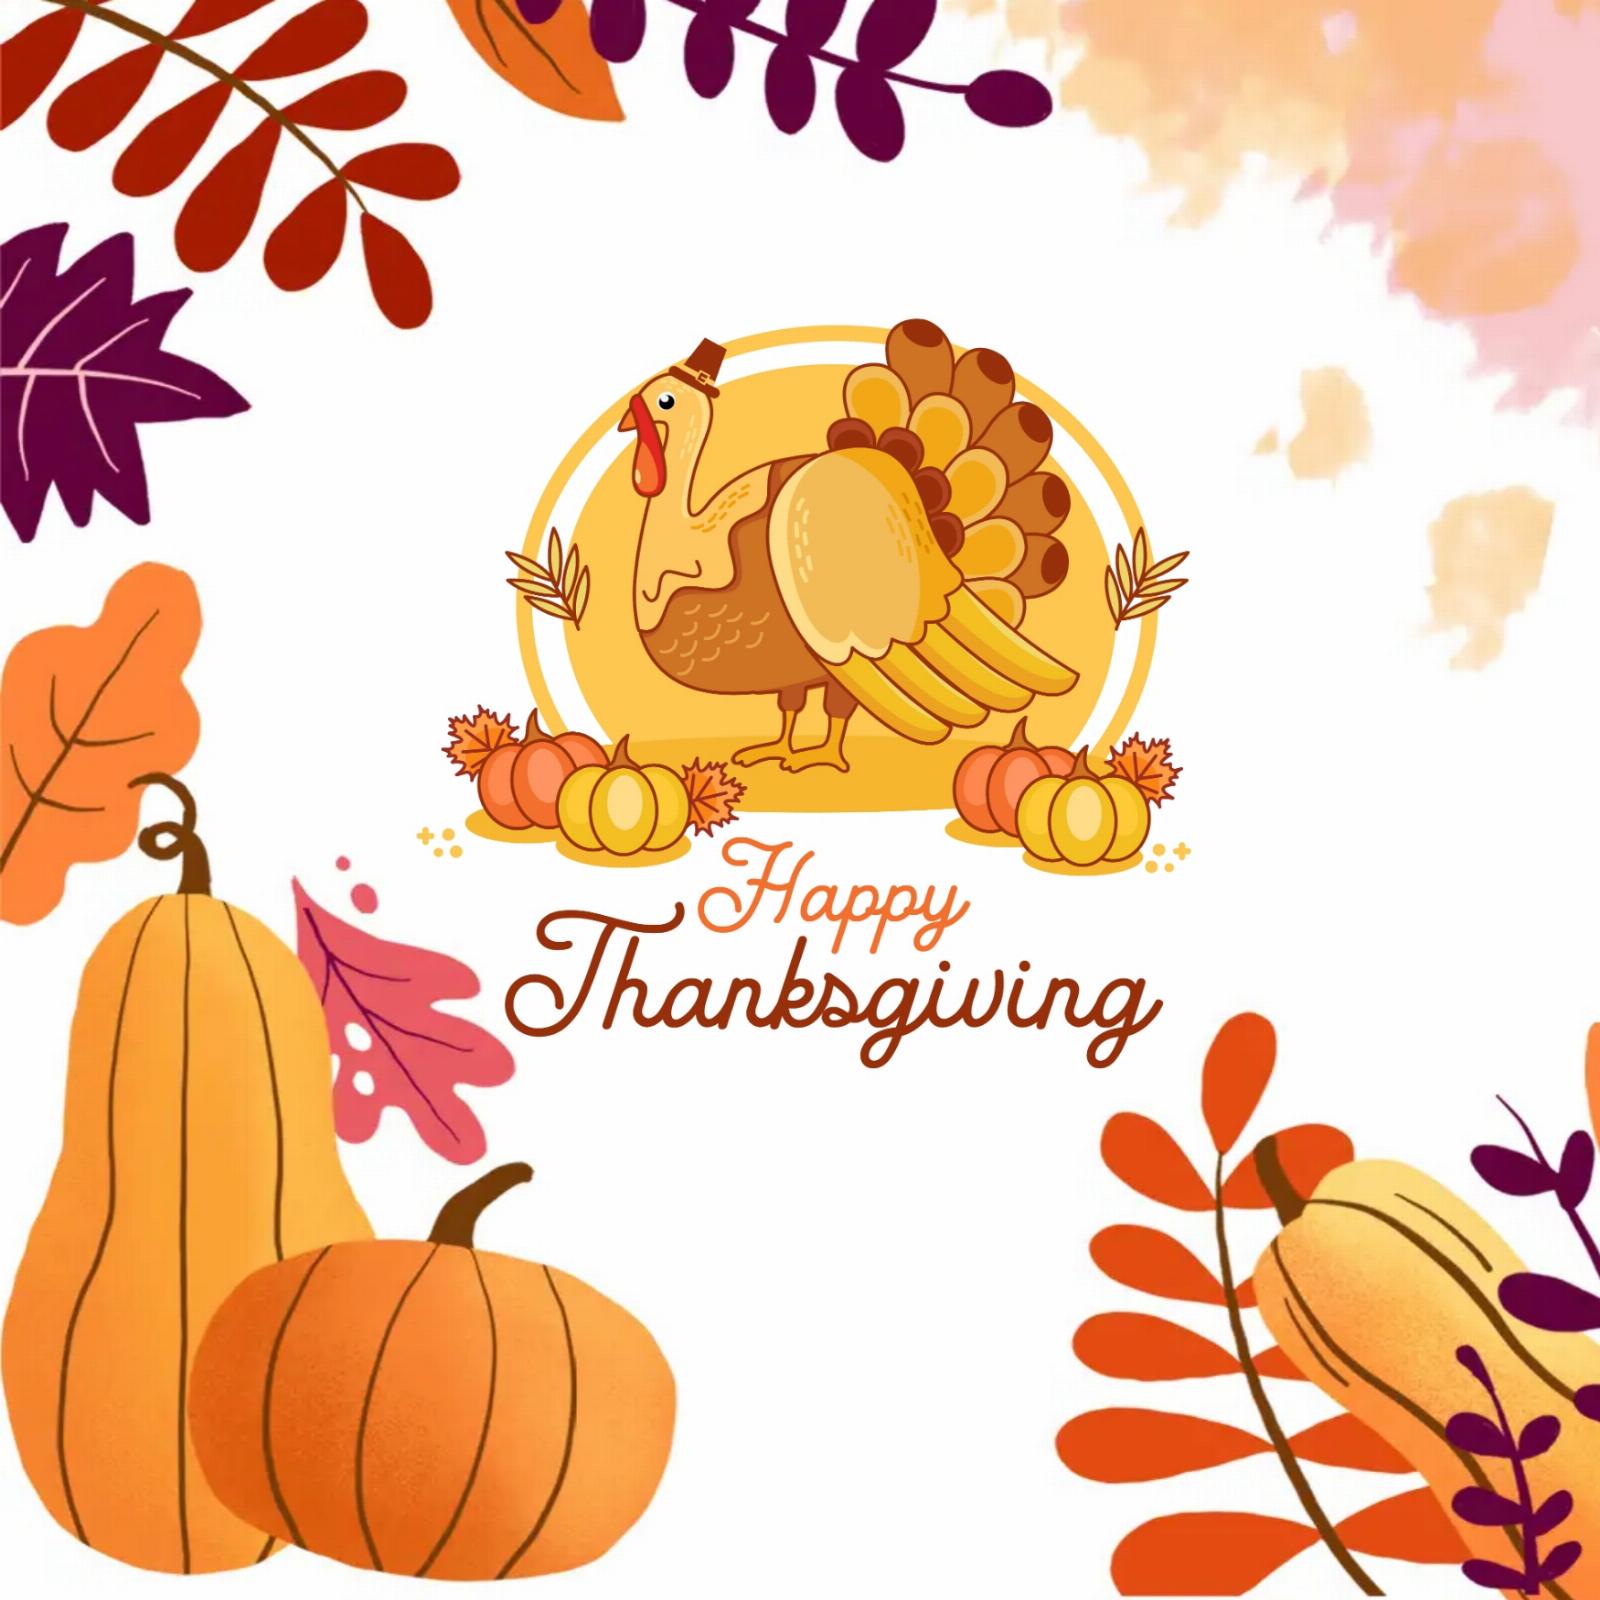 Happy Thanksgiving Animated Images